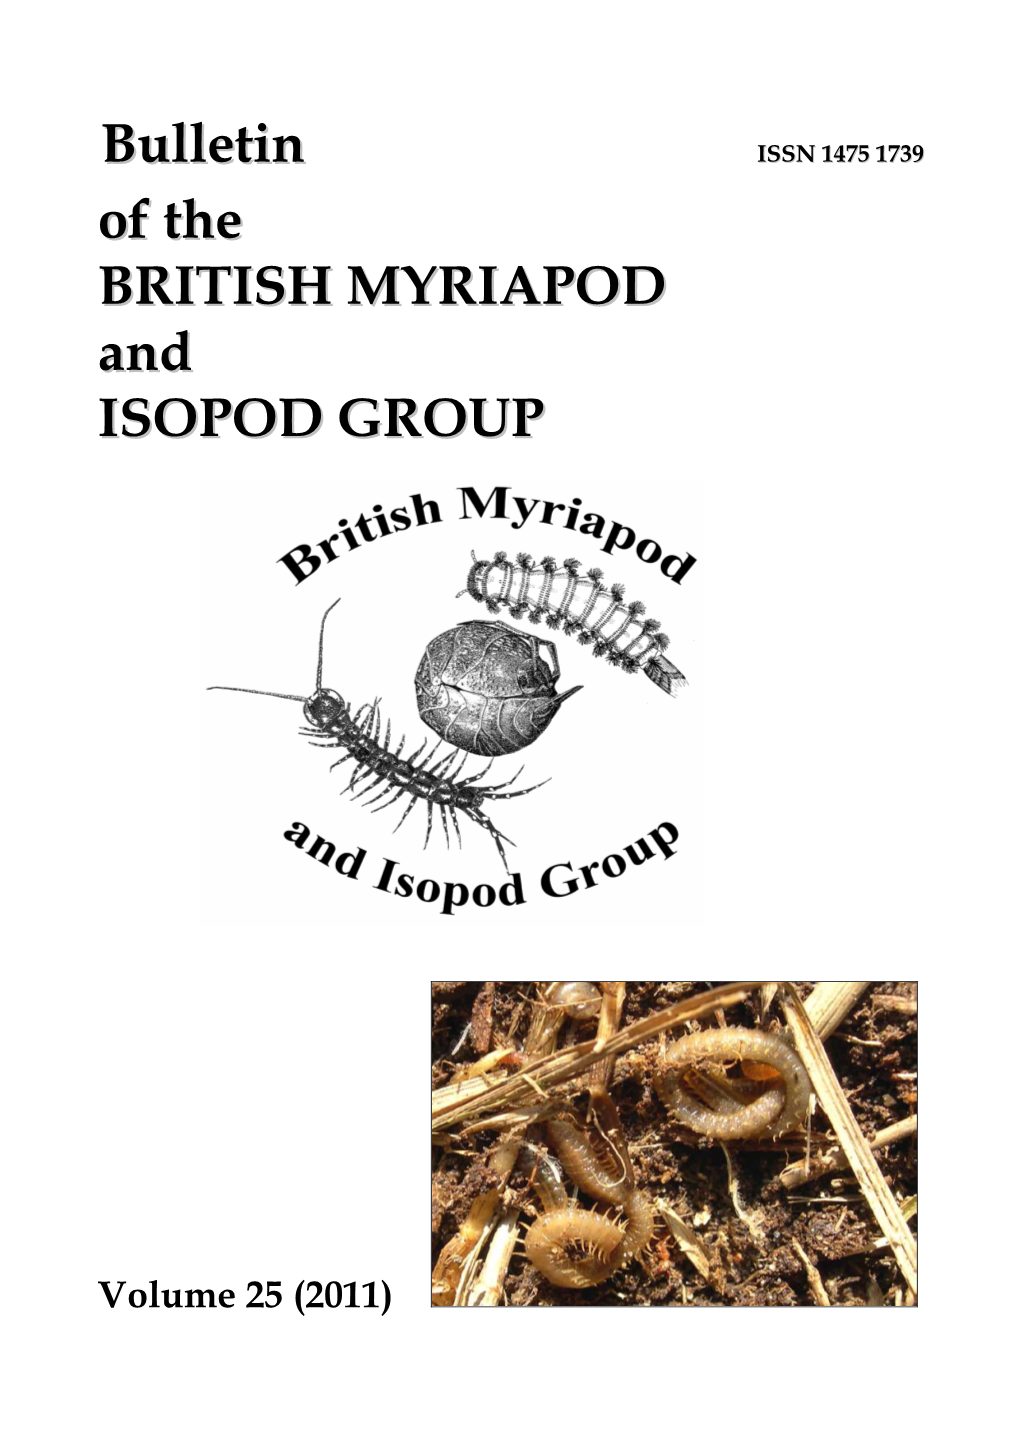 Bulletin of the British Myriapod and Isopod Group 25:14-36